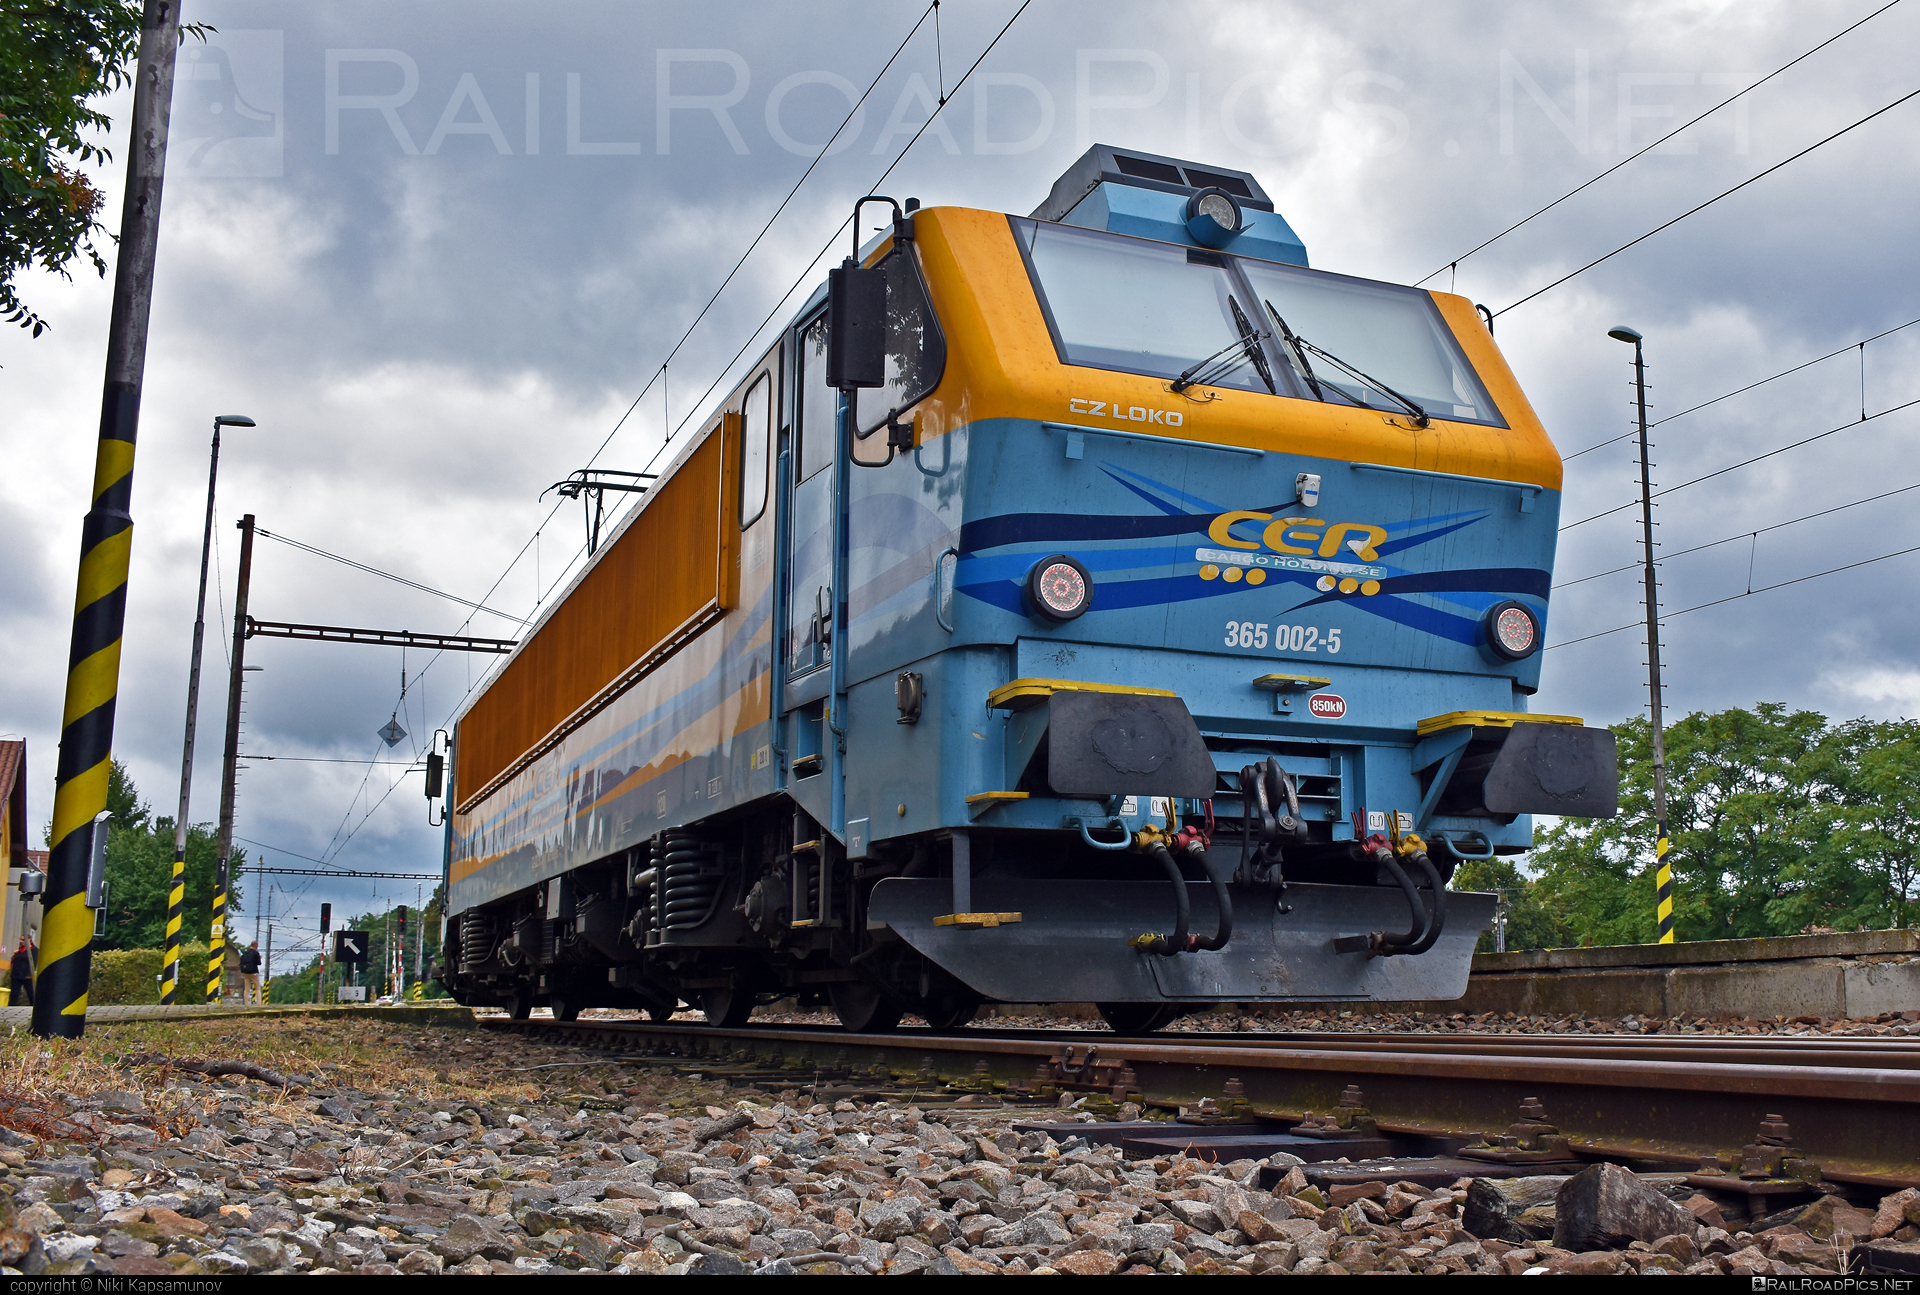 CZ LOKO EffiLiner 3000 - 365 002-5 operated by CER Slovakia a.s. #belgicanka #cer #cersk #cerslovakia #cerslovakiaas #czloko #czlokoas #effiliner #effiliner3000 #sncb12 #sncbclass12